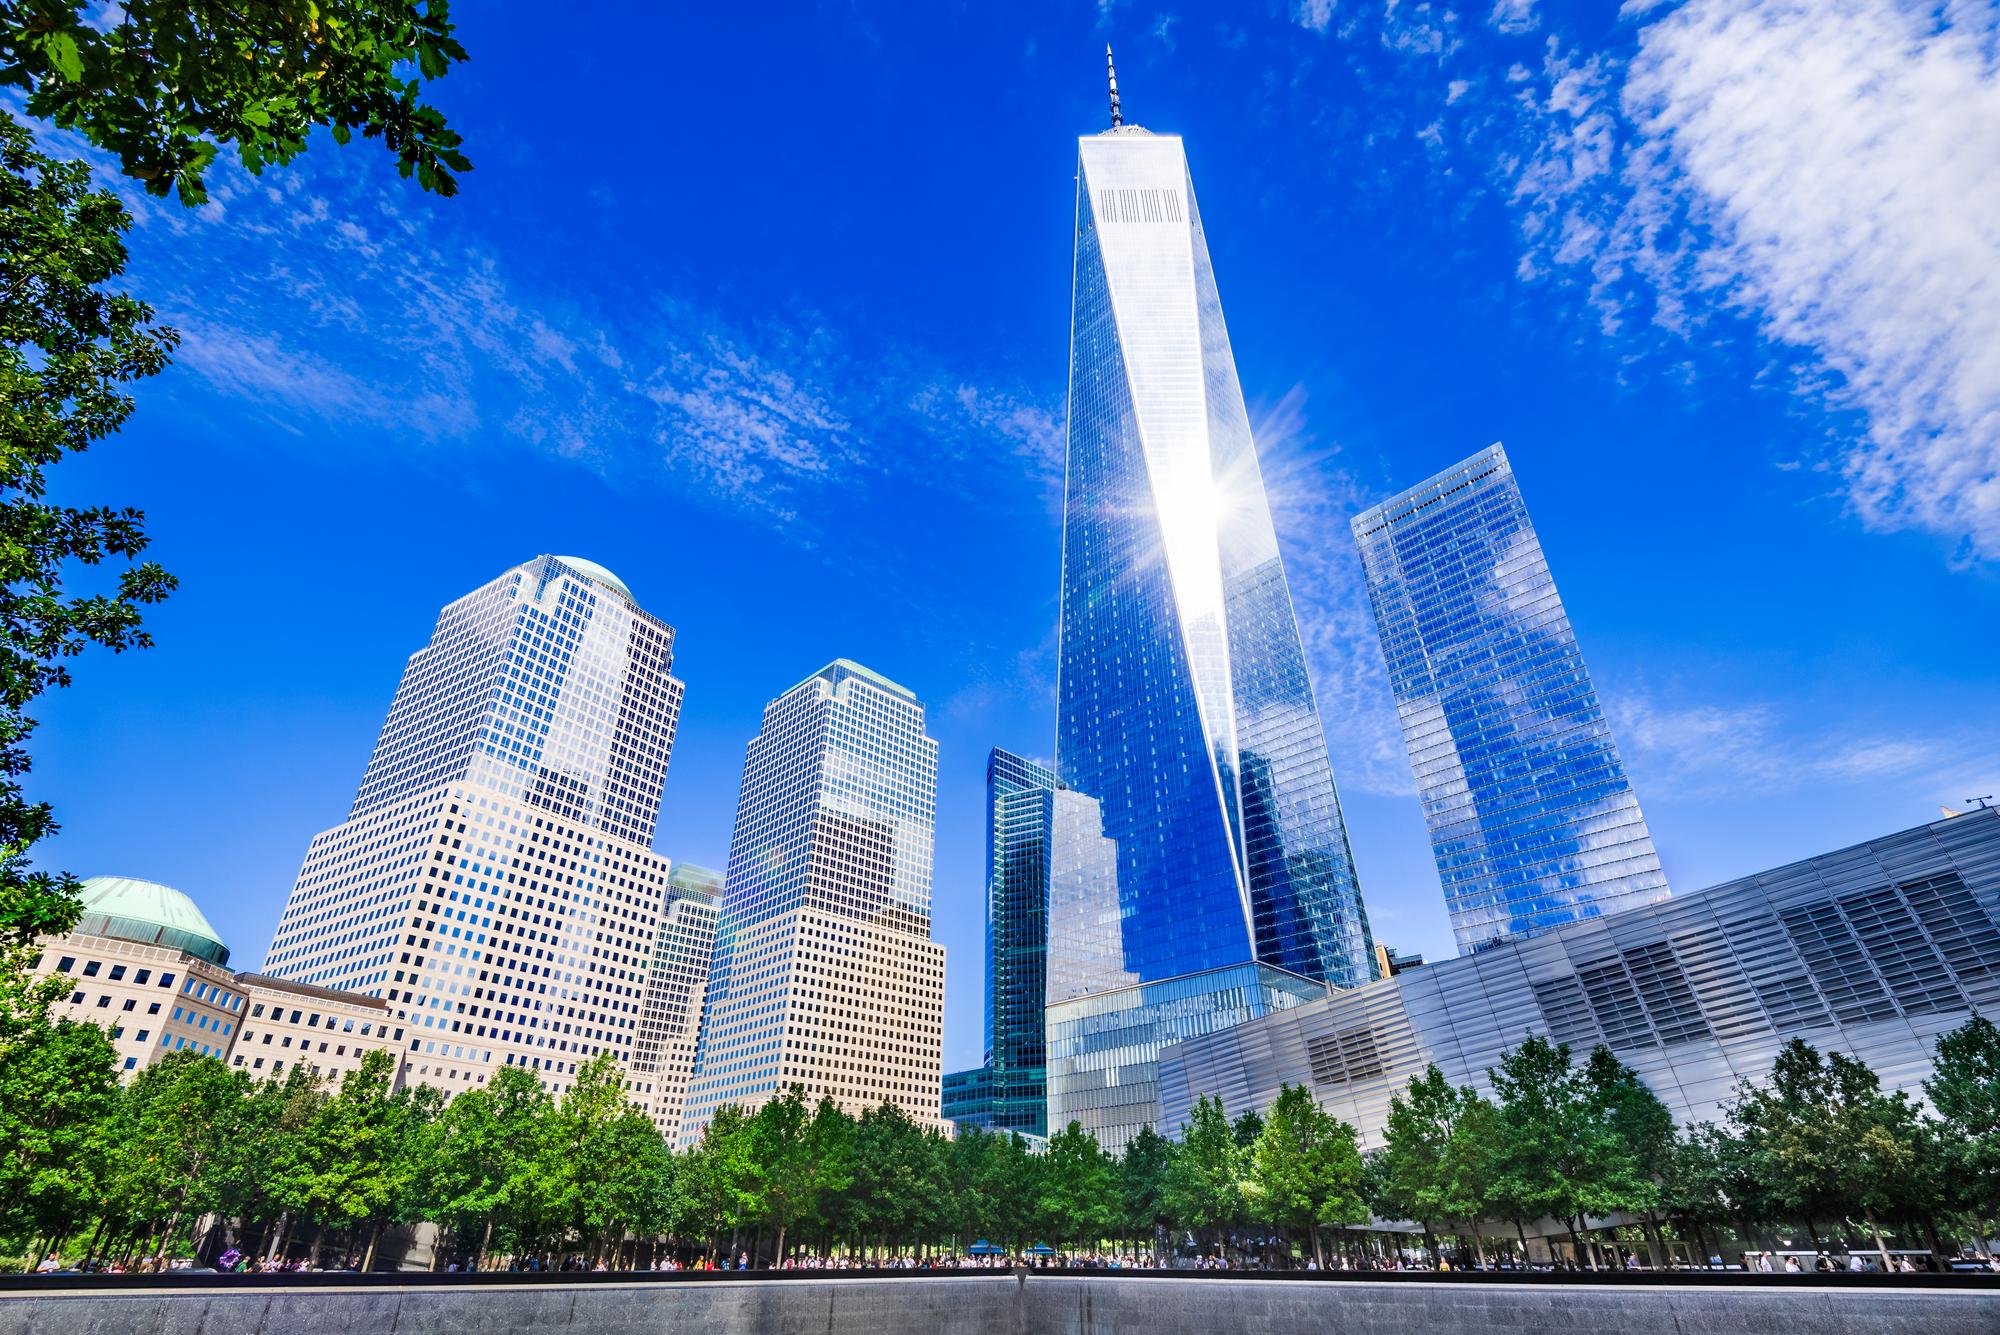 Unforgettable Experiences: Discovering the September 11 Memorial in New York